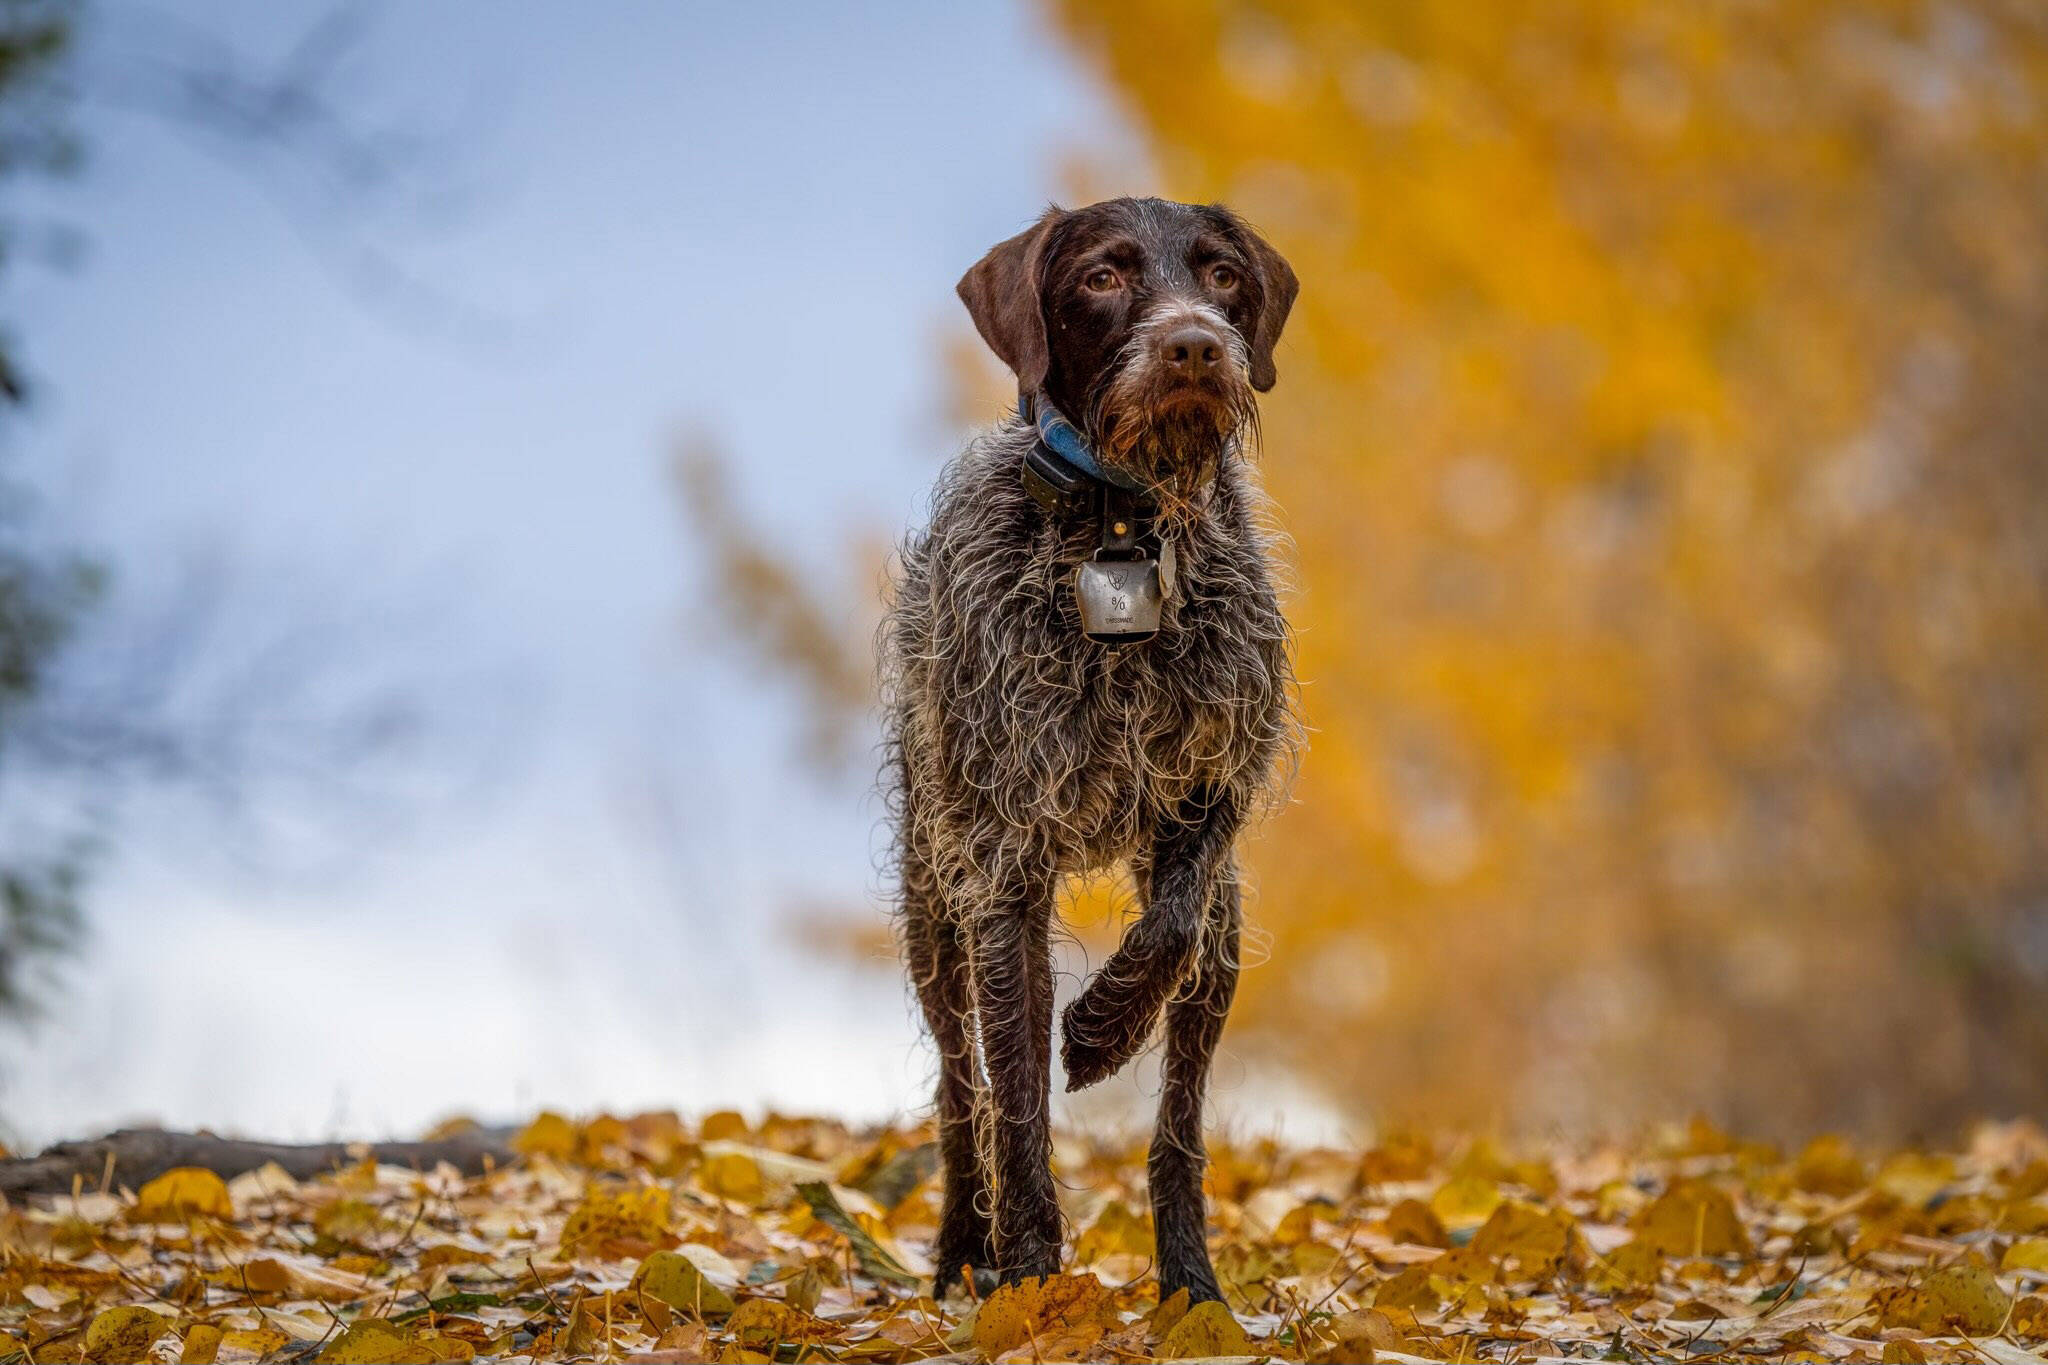 Fall colors, a dog and game in hand make for great outdoor experiences on the Kenai National Wildlife Refuge. (Photo by Colin Canterbury/USFWS)